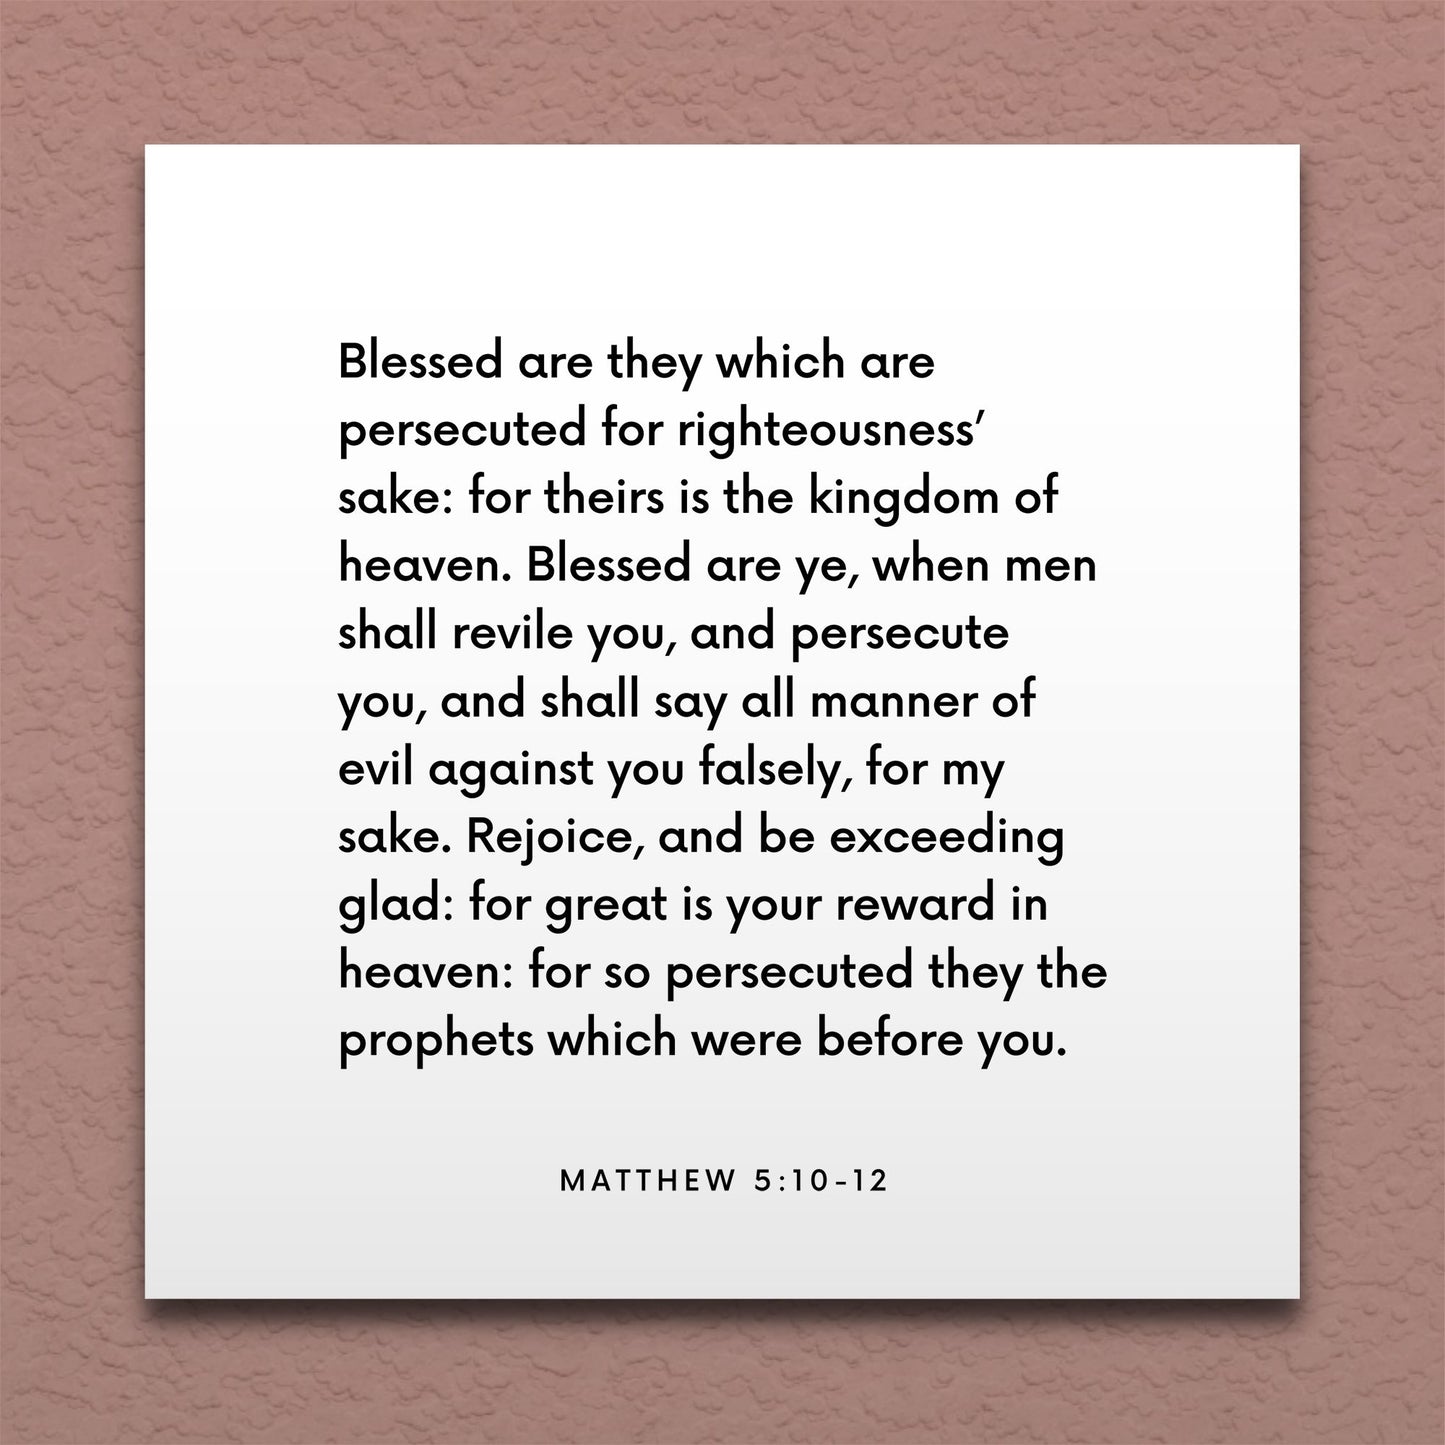 Wall-mounted scripture tile for Matthew 5:10-12 - "So persecuted they the prophets which were before you"